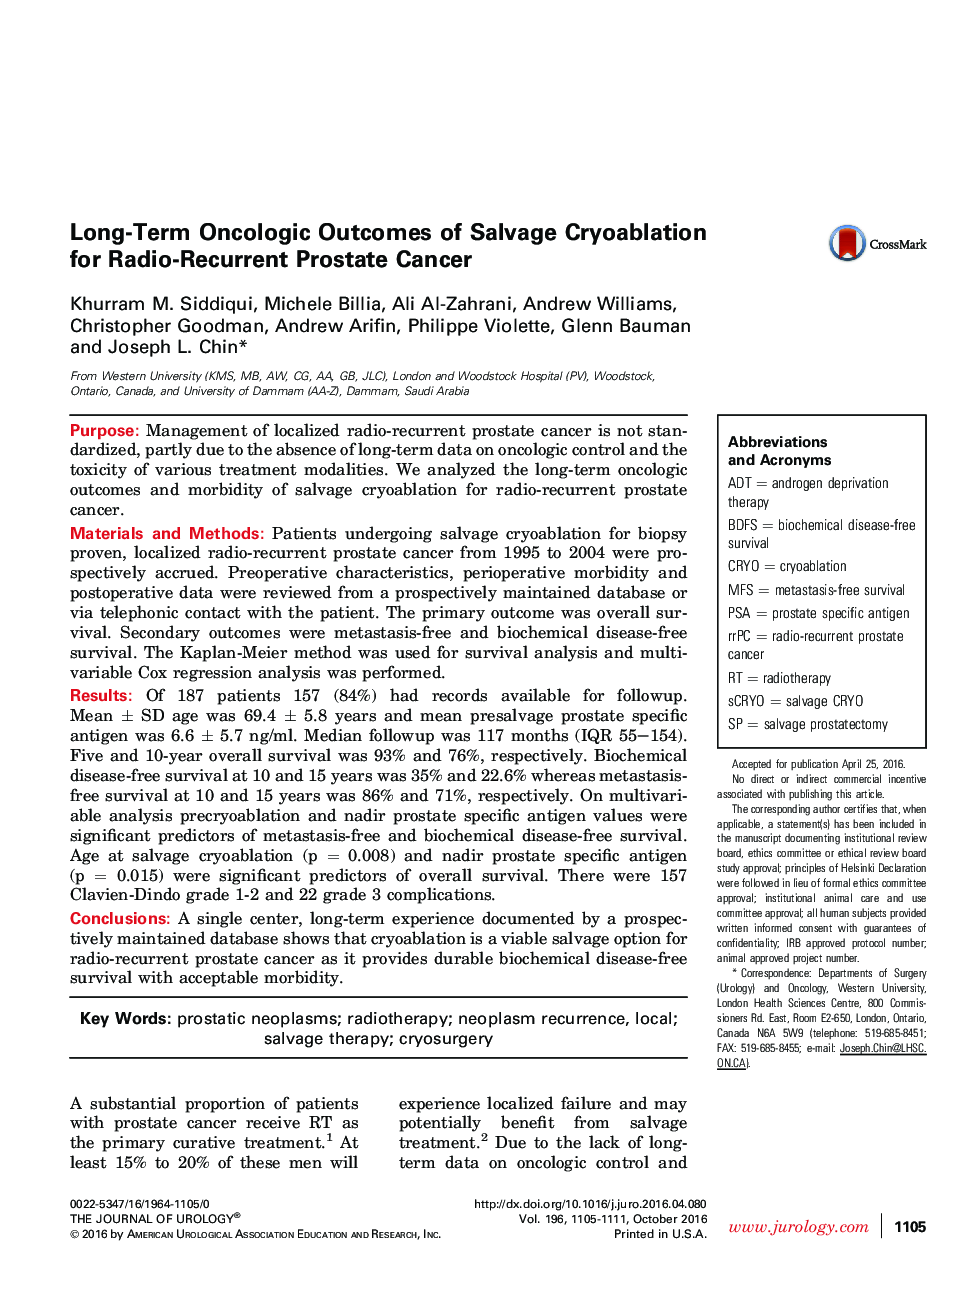 Long-Term Oncologic Outcomes of Salvage Cryoablation for Radio-Recurrent Prostate Cancer 